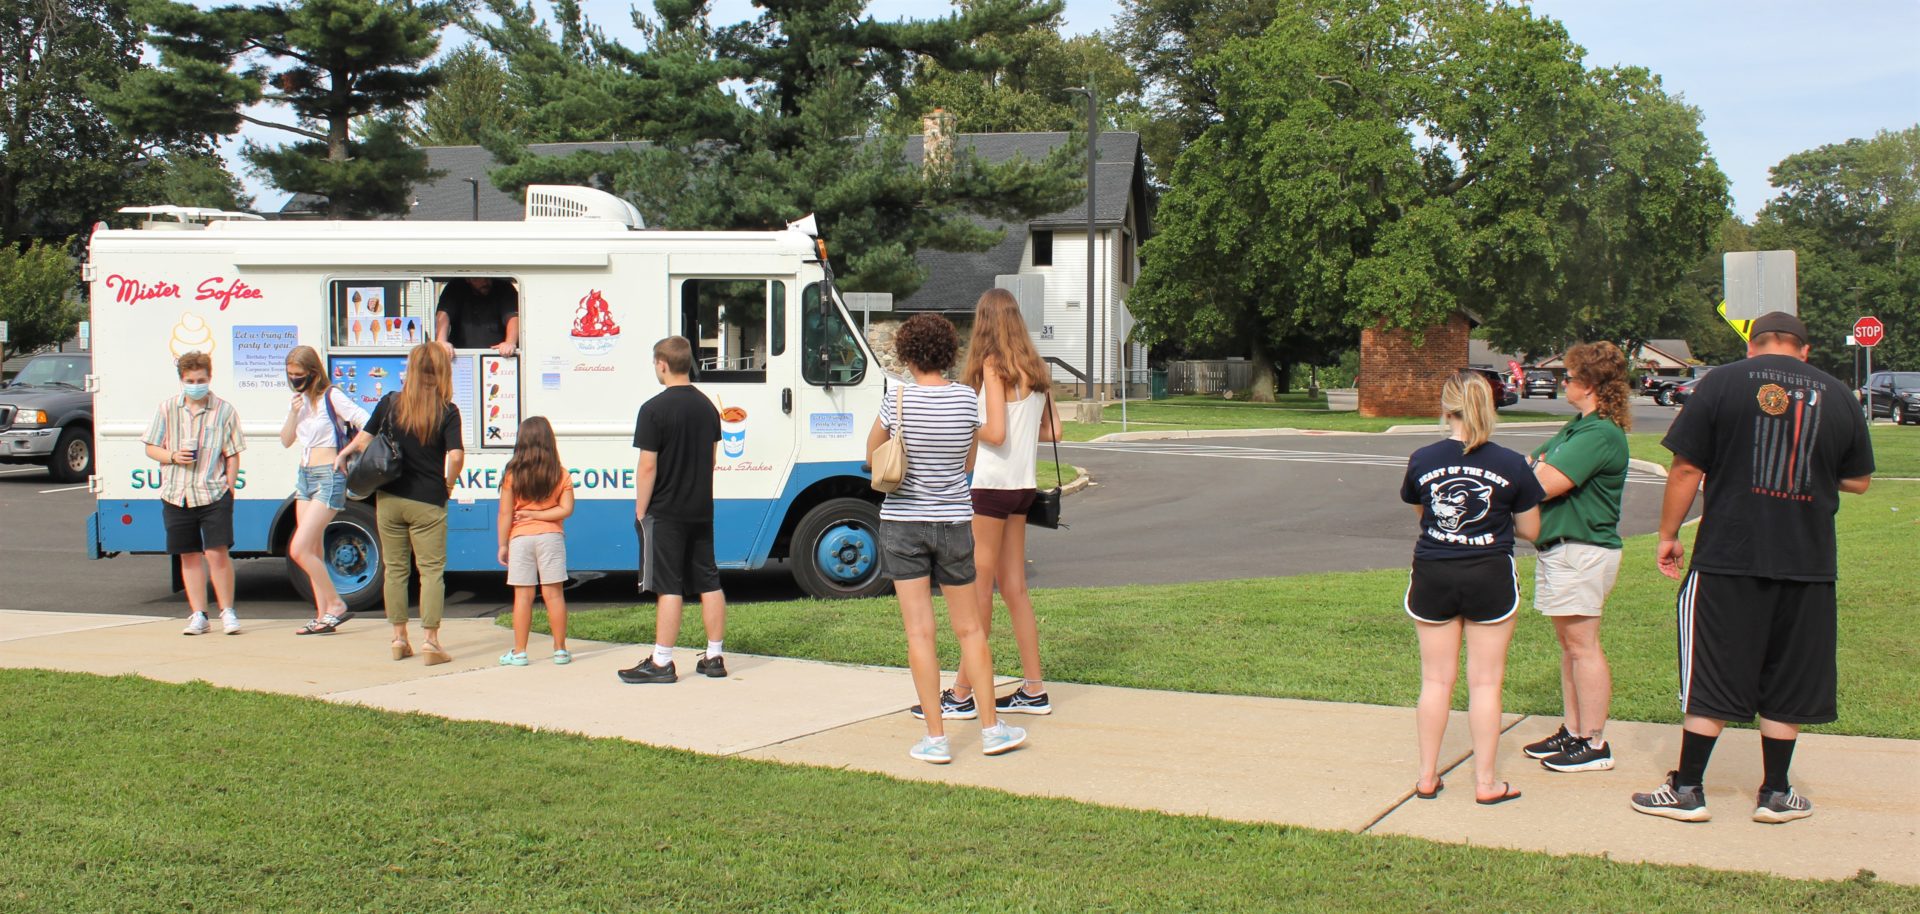 Students on campus waiting for the ice cream truck.